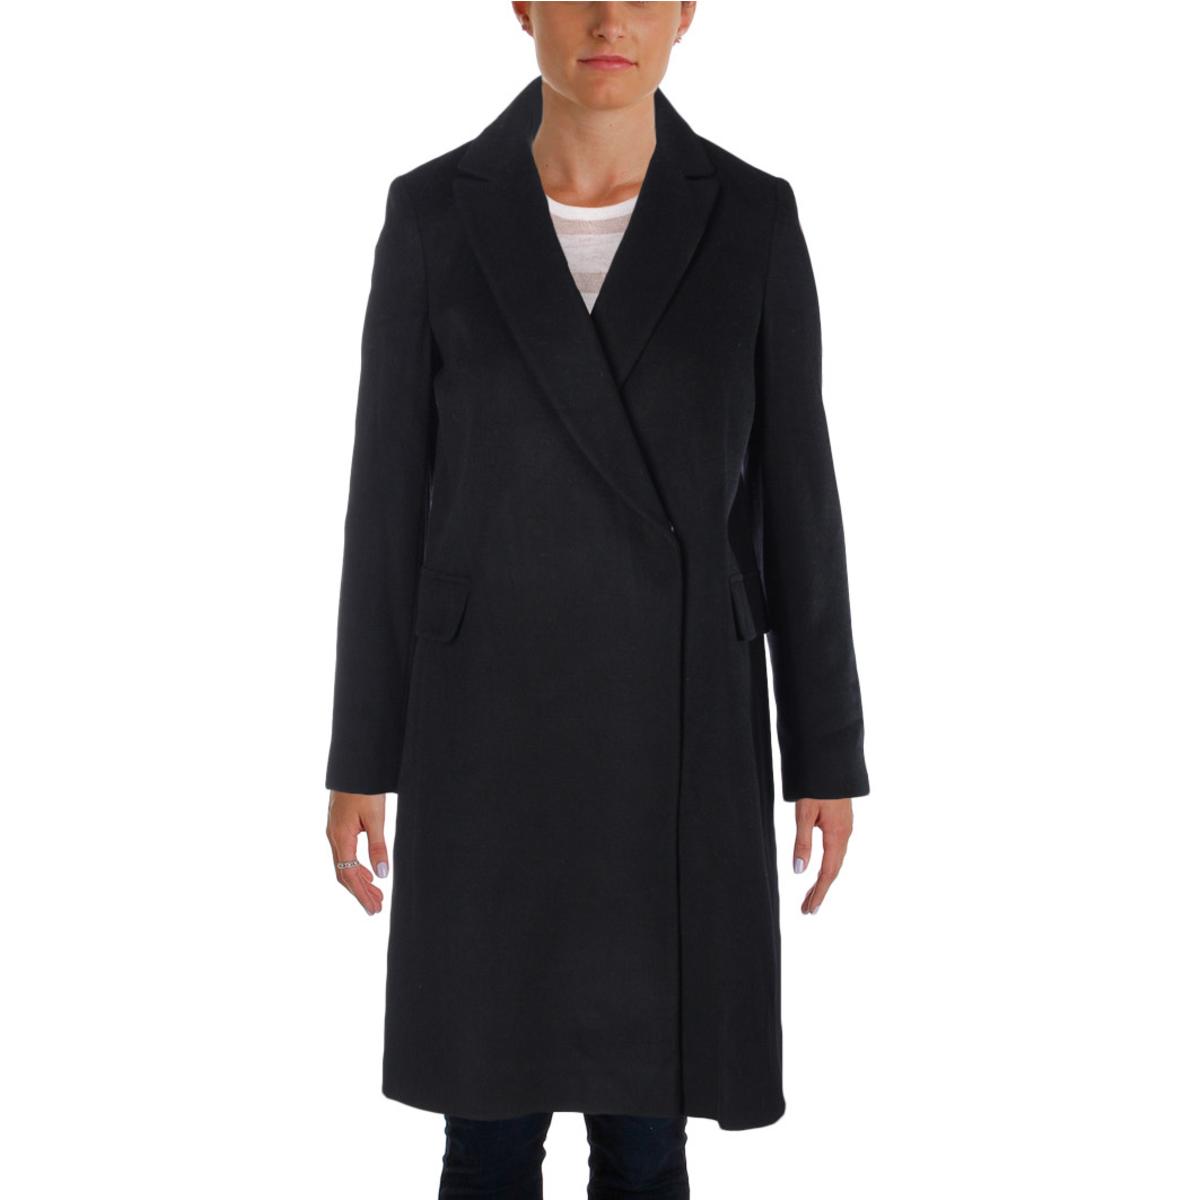 Elie Tahari 7804 Womens Wool Blend Double Breasted Trench Coat ...